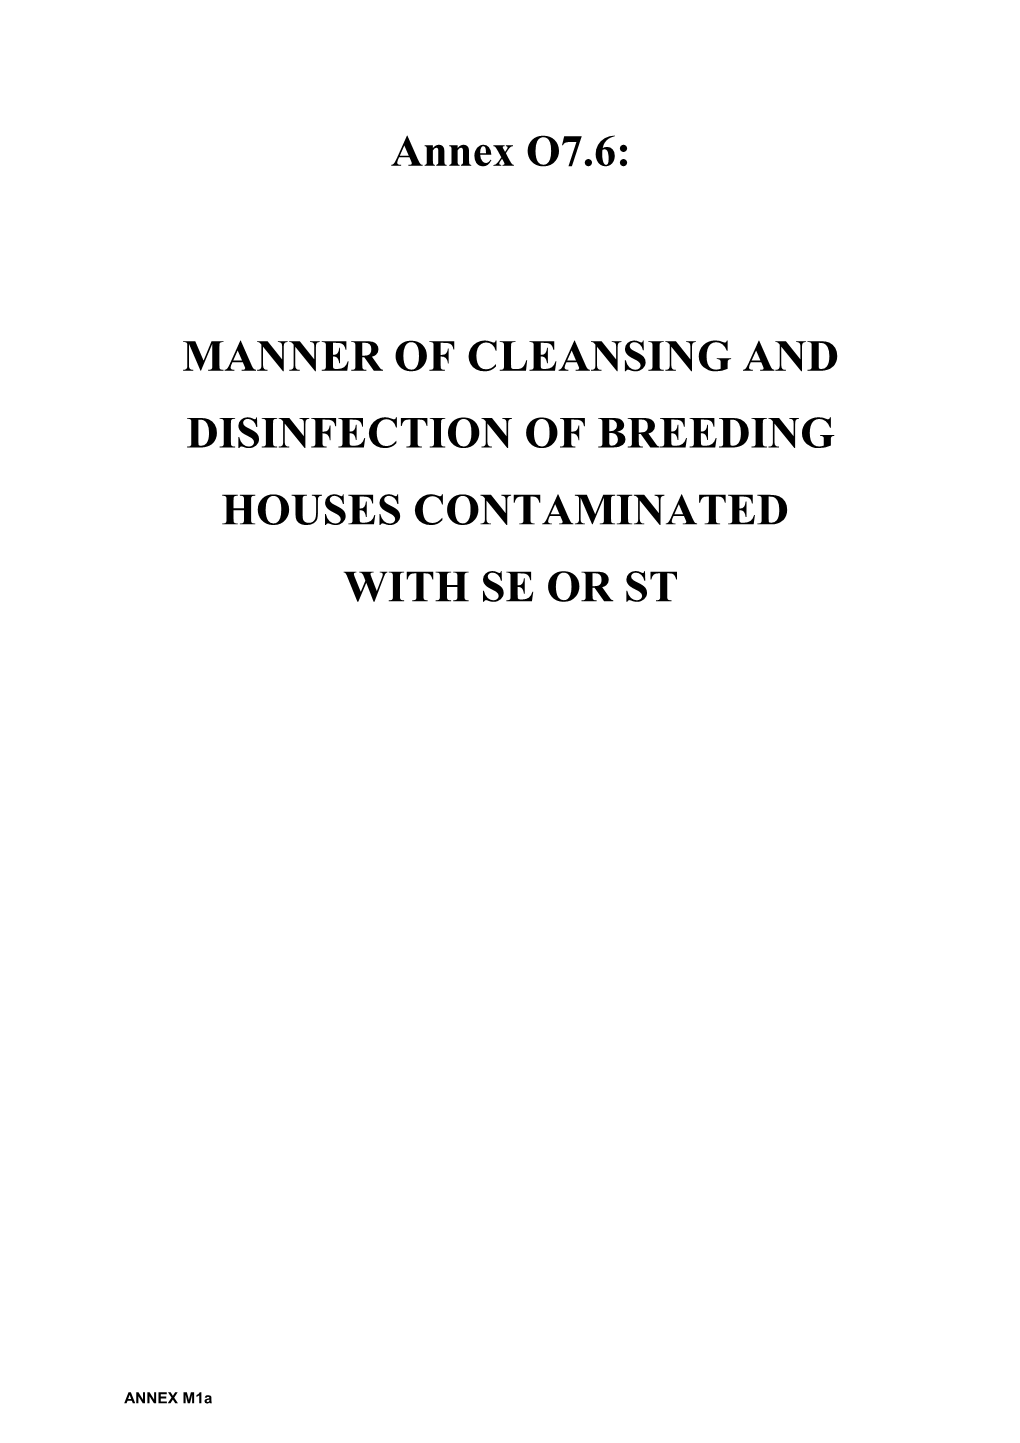 Manner of Cleansing and Disinfection of Breeding Houses Contaminated